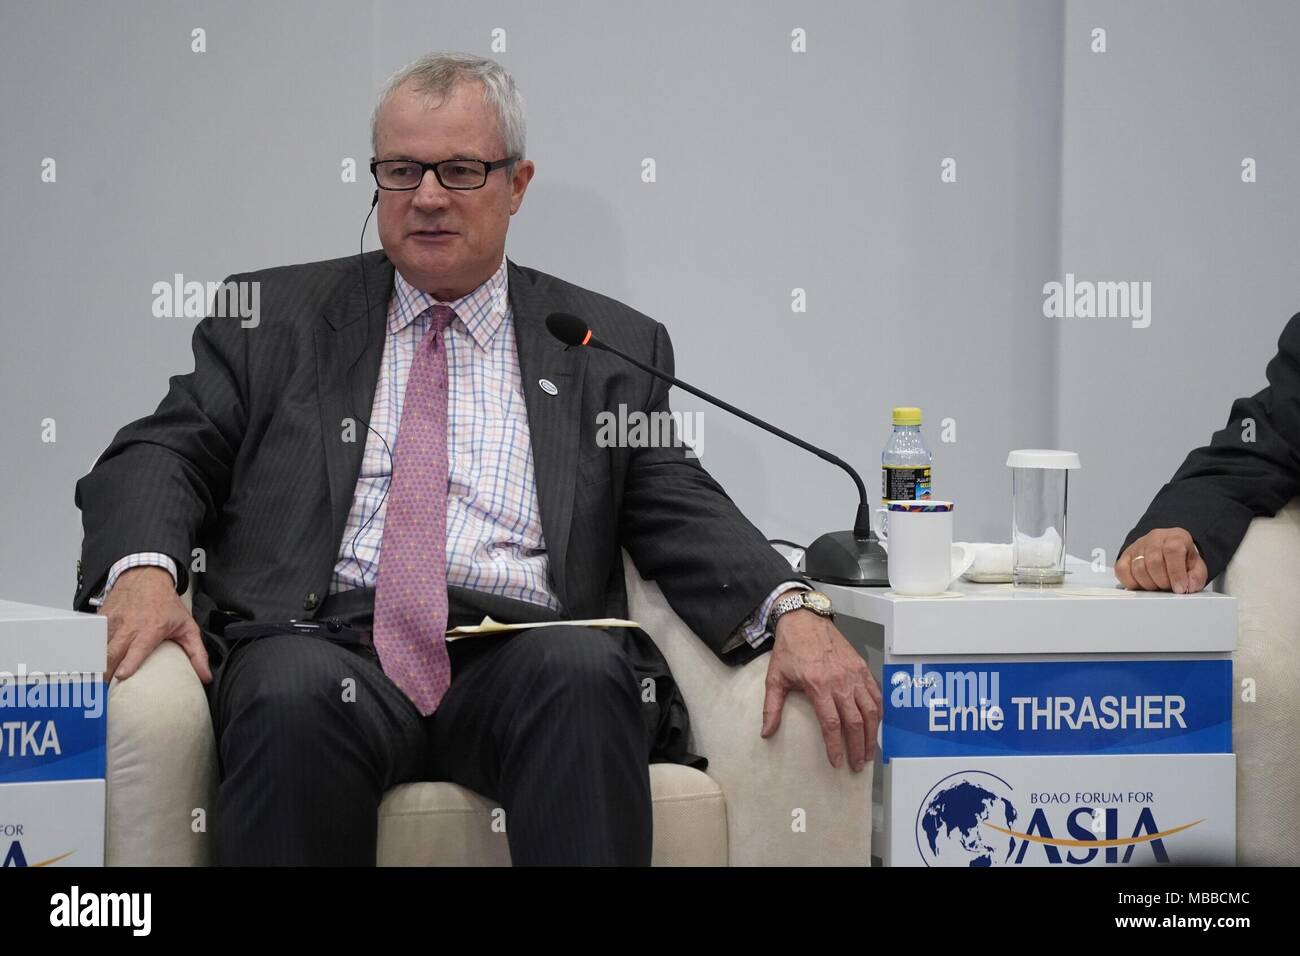 Boao, China's Hainan Province. 10th Apr, 2018. Ernie Thrasher, CEO of  Xcoal, speaks at the session of "The 'New Cycle' of Commodities? " during  the Boao Forum for Asia Annual Conference 2018